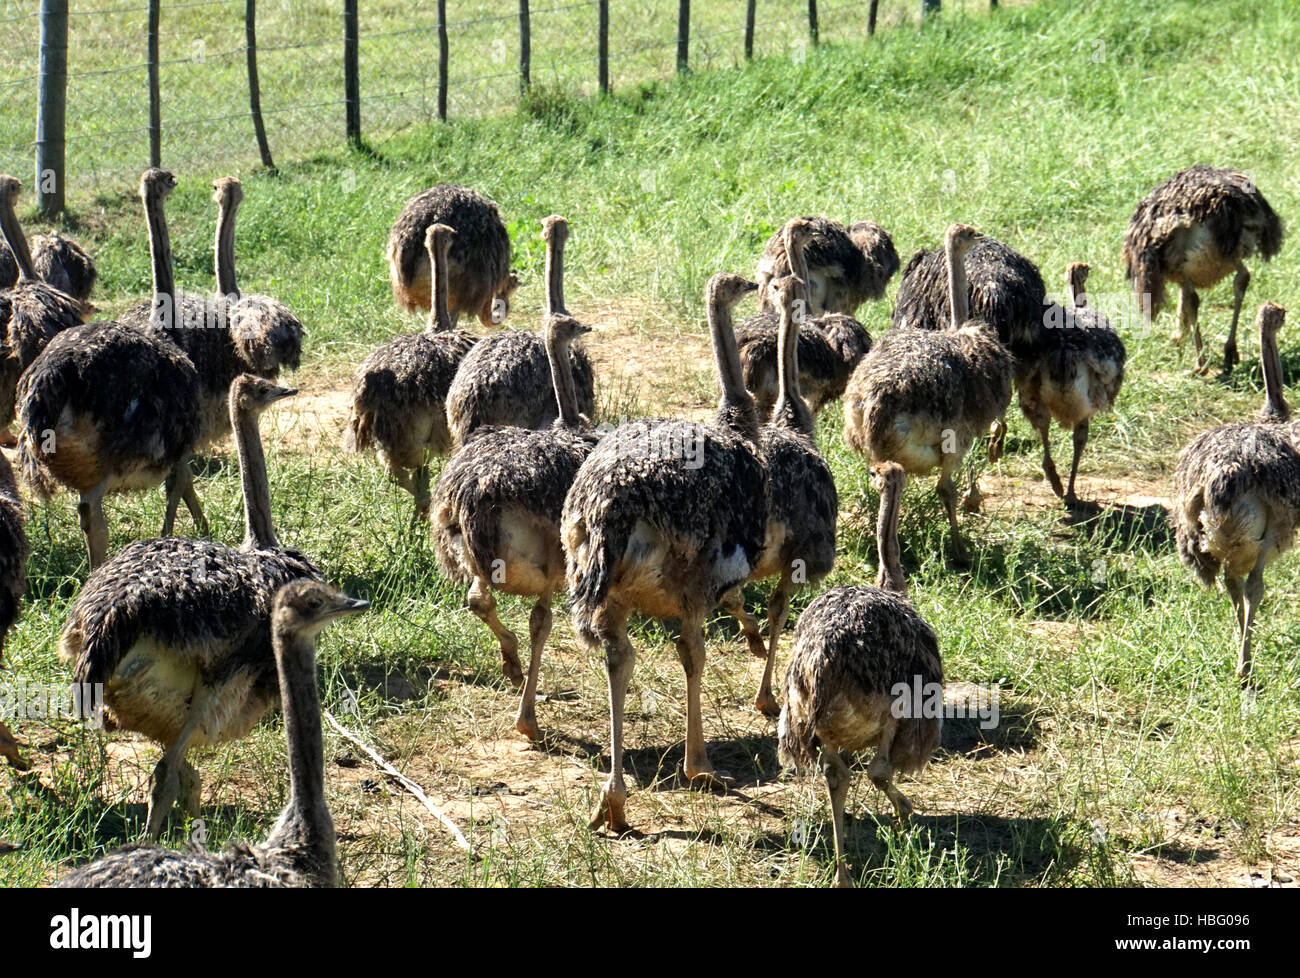 Young ostriches in South Africa Stock Photo